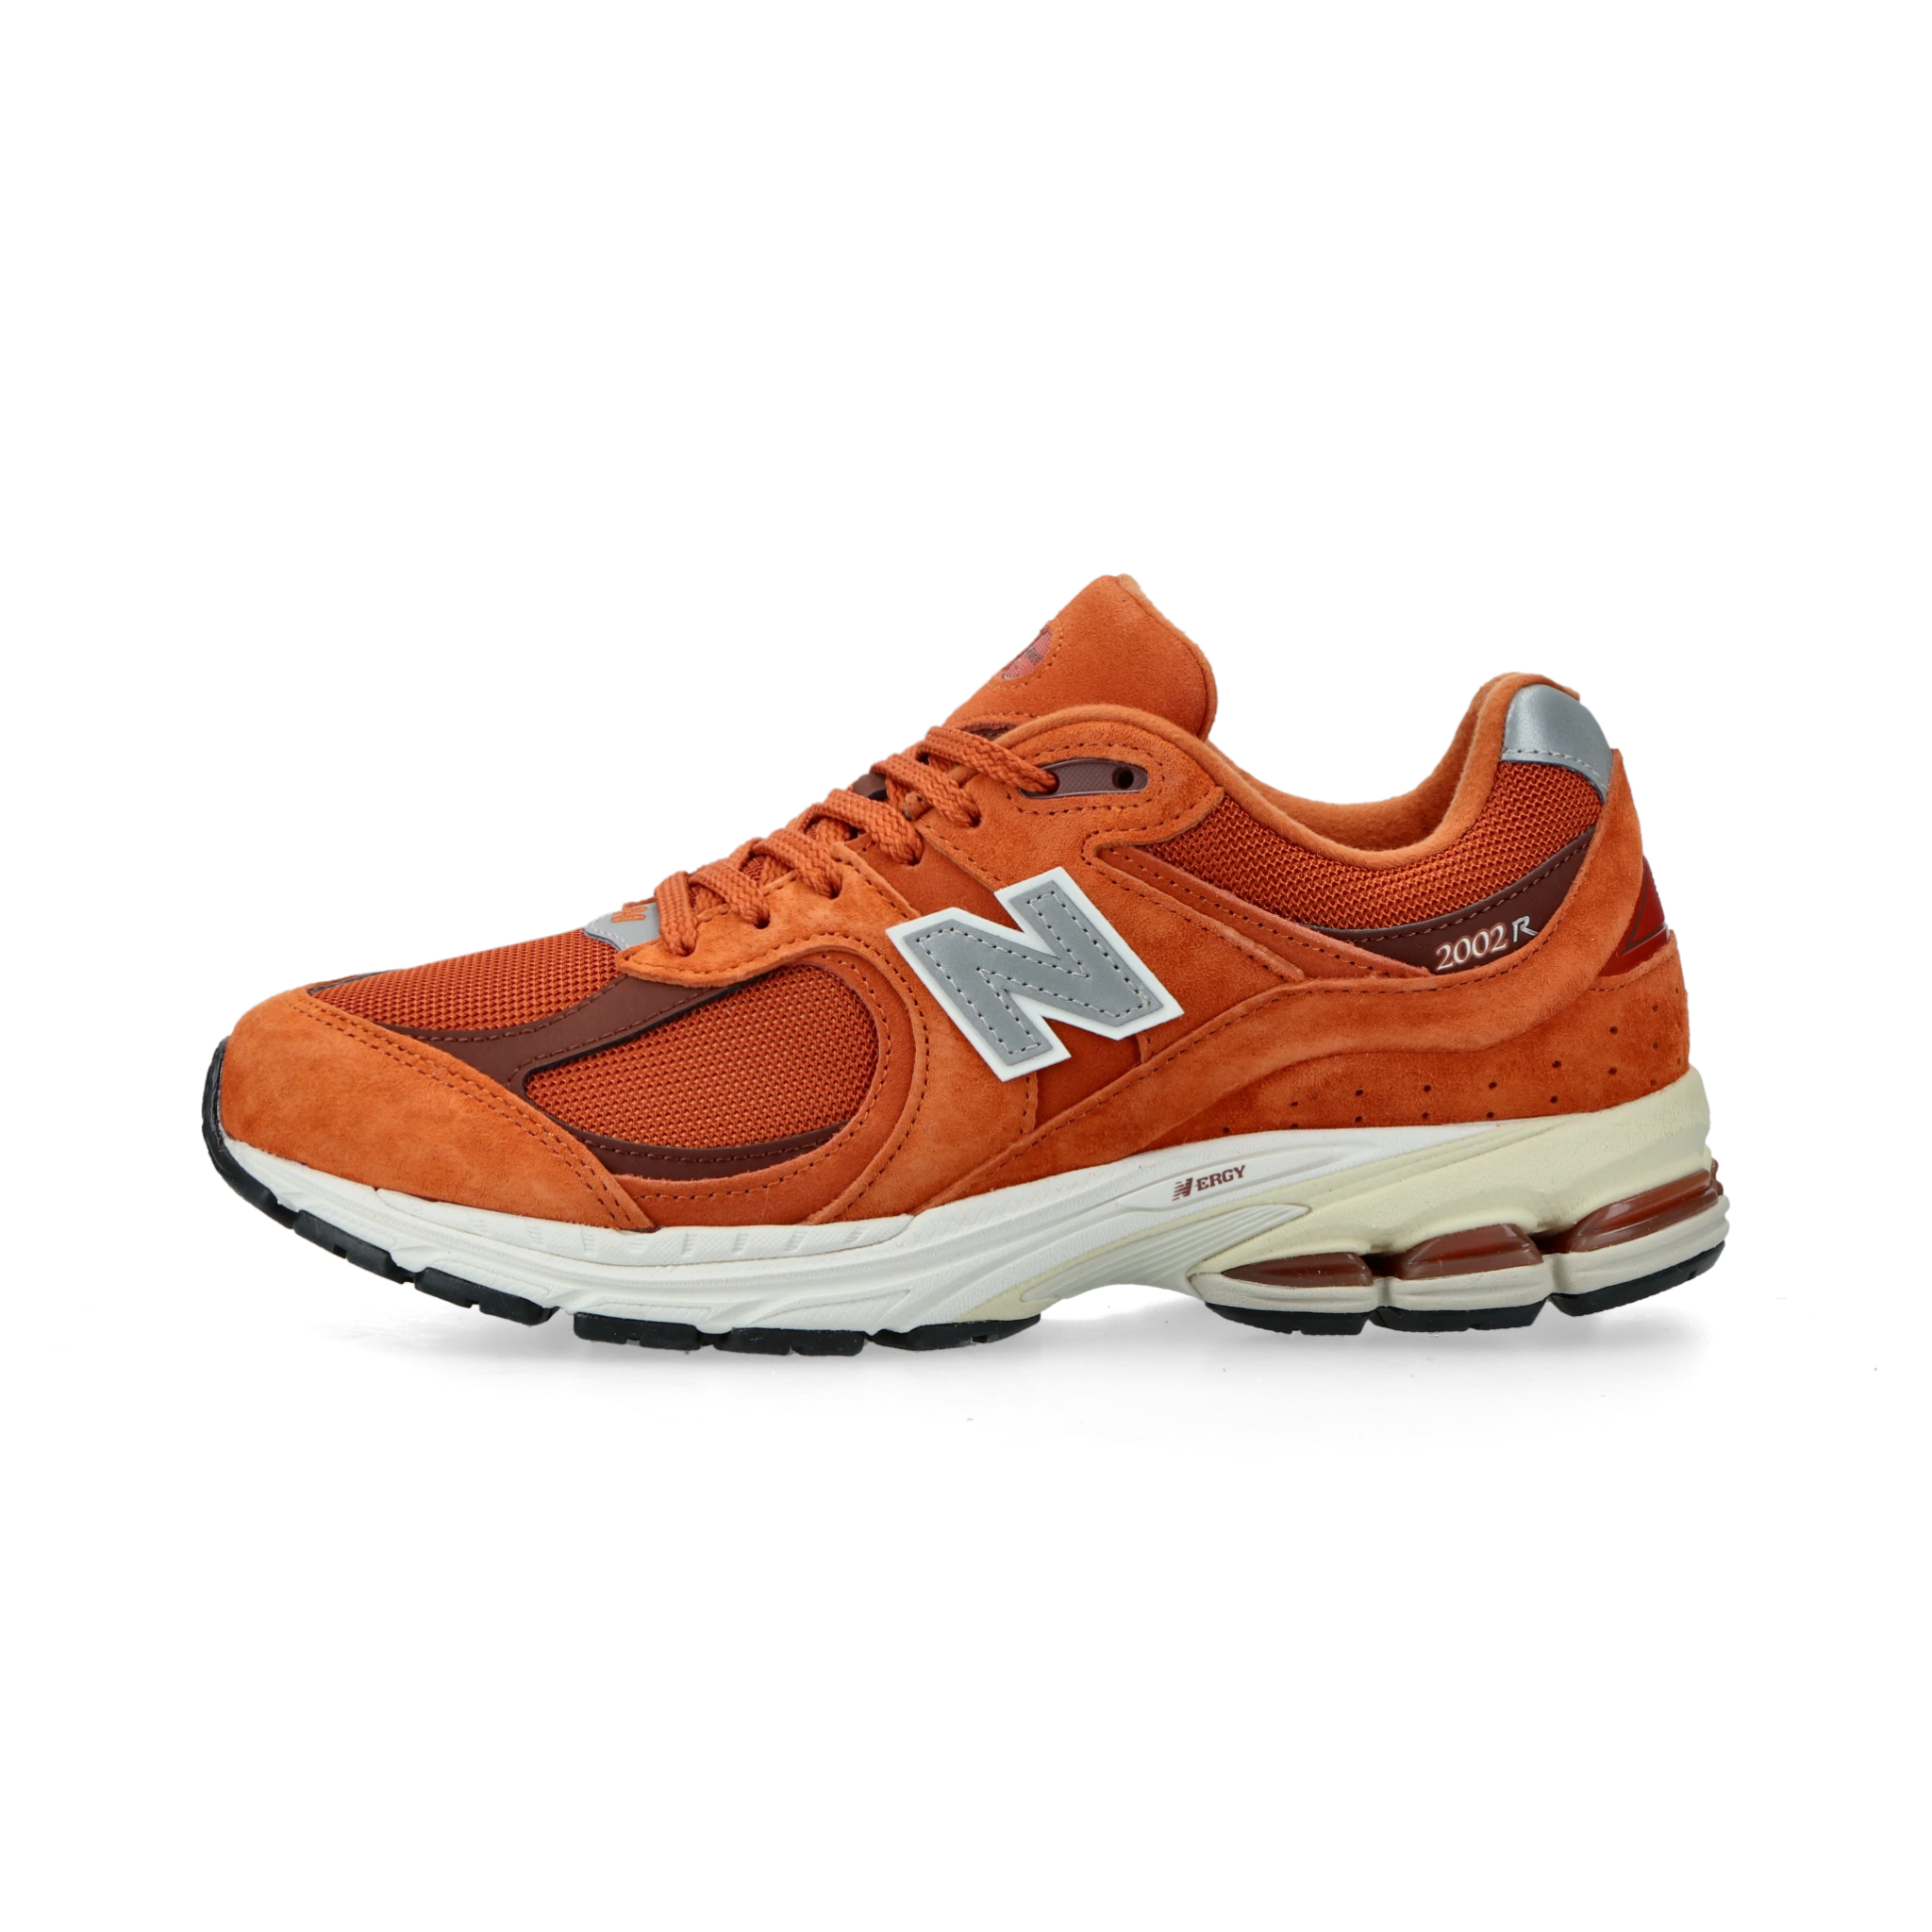 New Balance 2002R Rust Oxide | M2002RC | Hype Temple